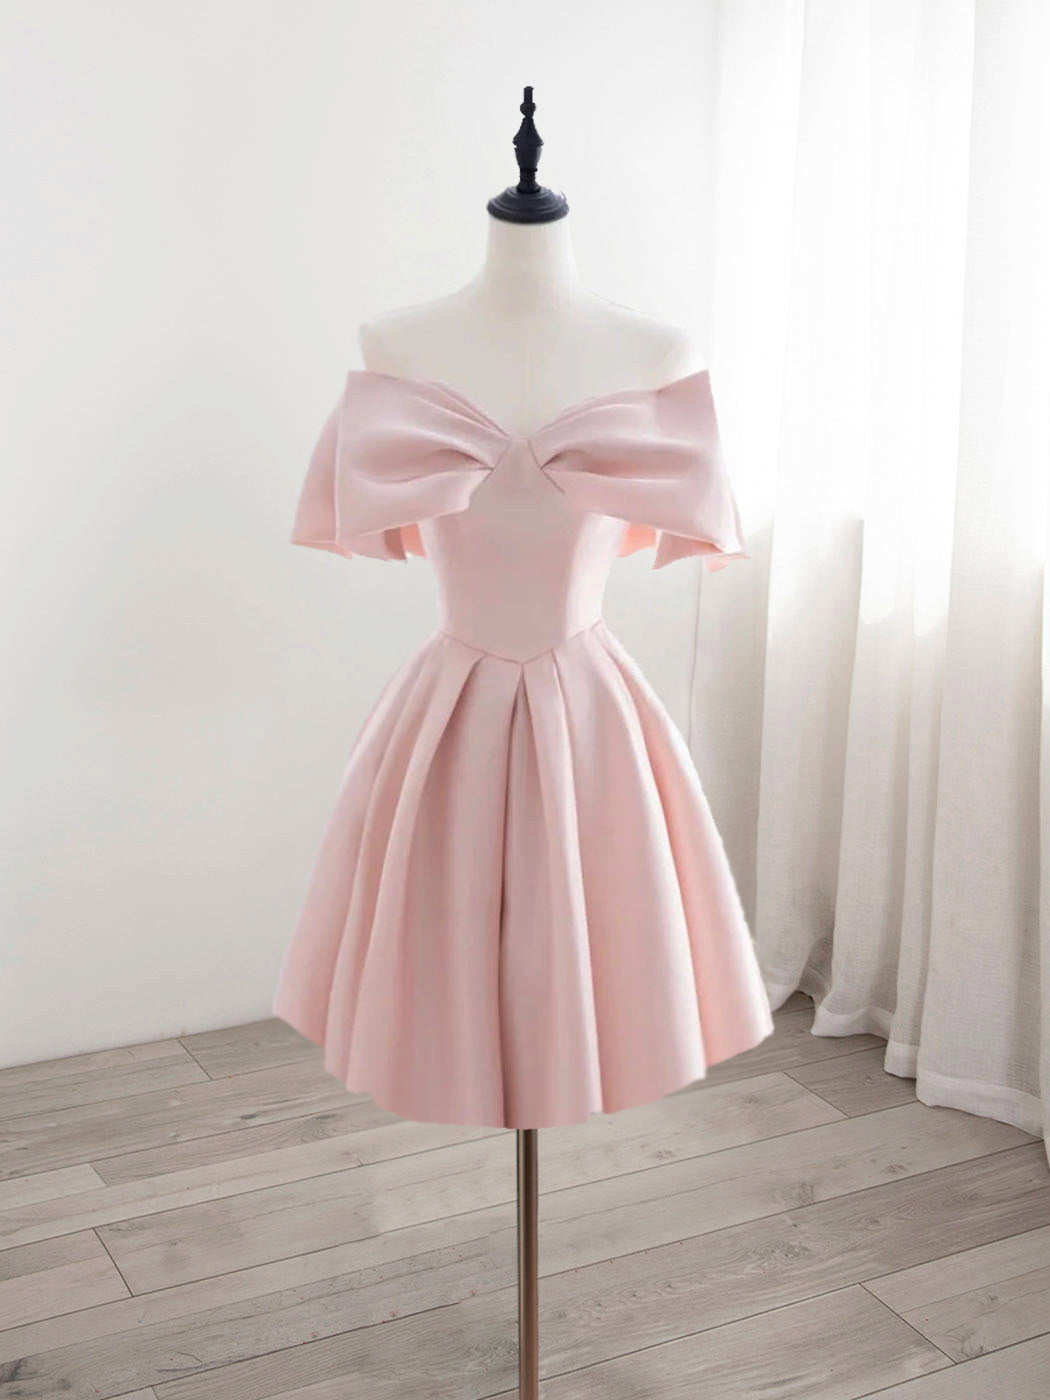 Adorable Pink Satin Short Homecoming Dress Graduation Dress with Big Bow Front - DollyGown